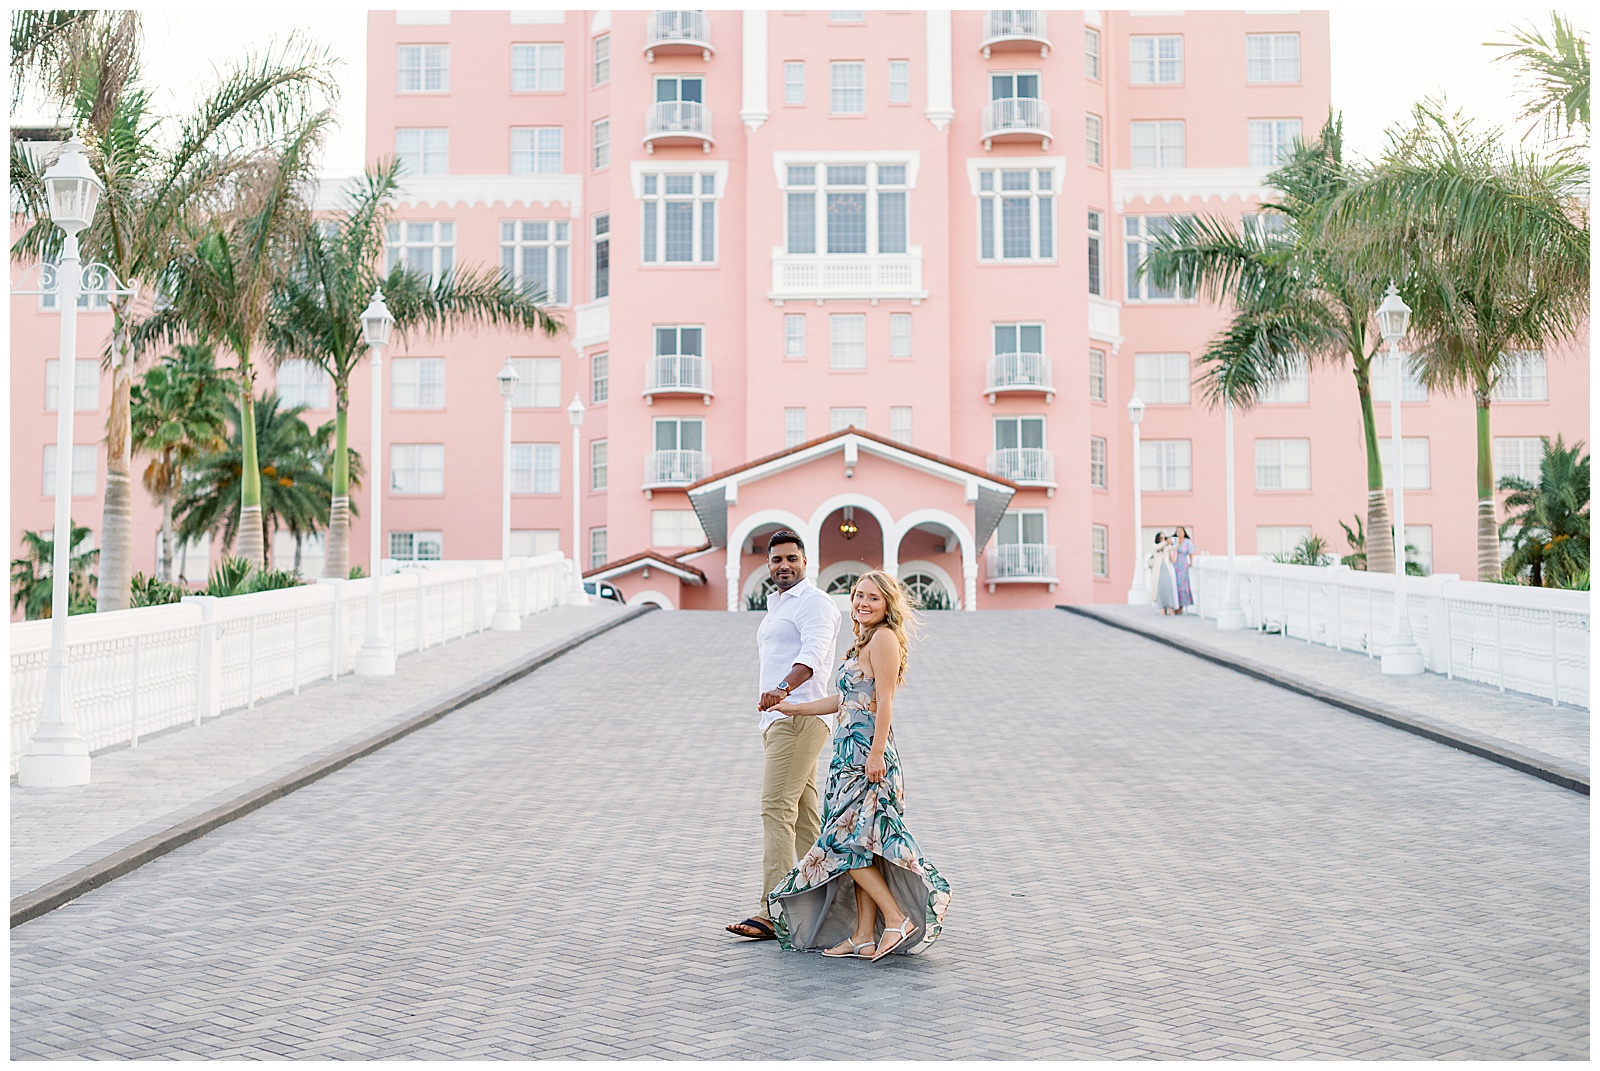 Top 10 things to do after getting engaged, tampa engagement, tampa wedding photographer, tampa engagement photographer, tampa proposal photographer, tampa photographer, luxury wedding photographer, luxury photography, wedding tips, wedding planning, downtown tampa, downtown tampa engagement photography, downtown tampa wedding, don cesar, don cesar wedding